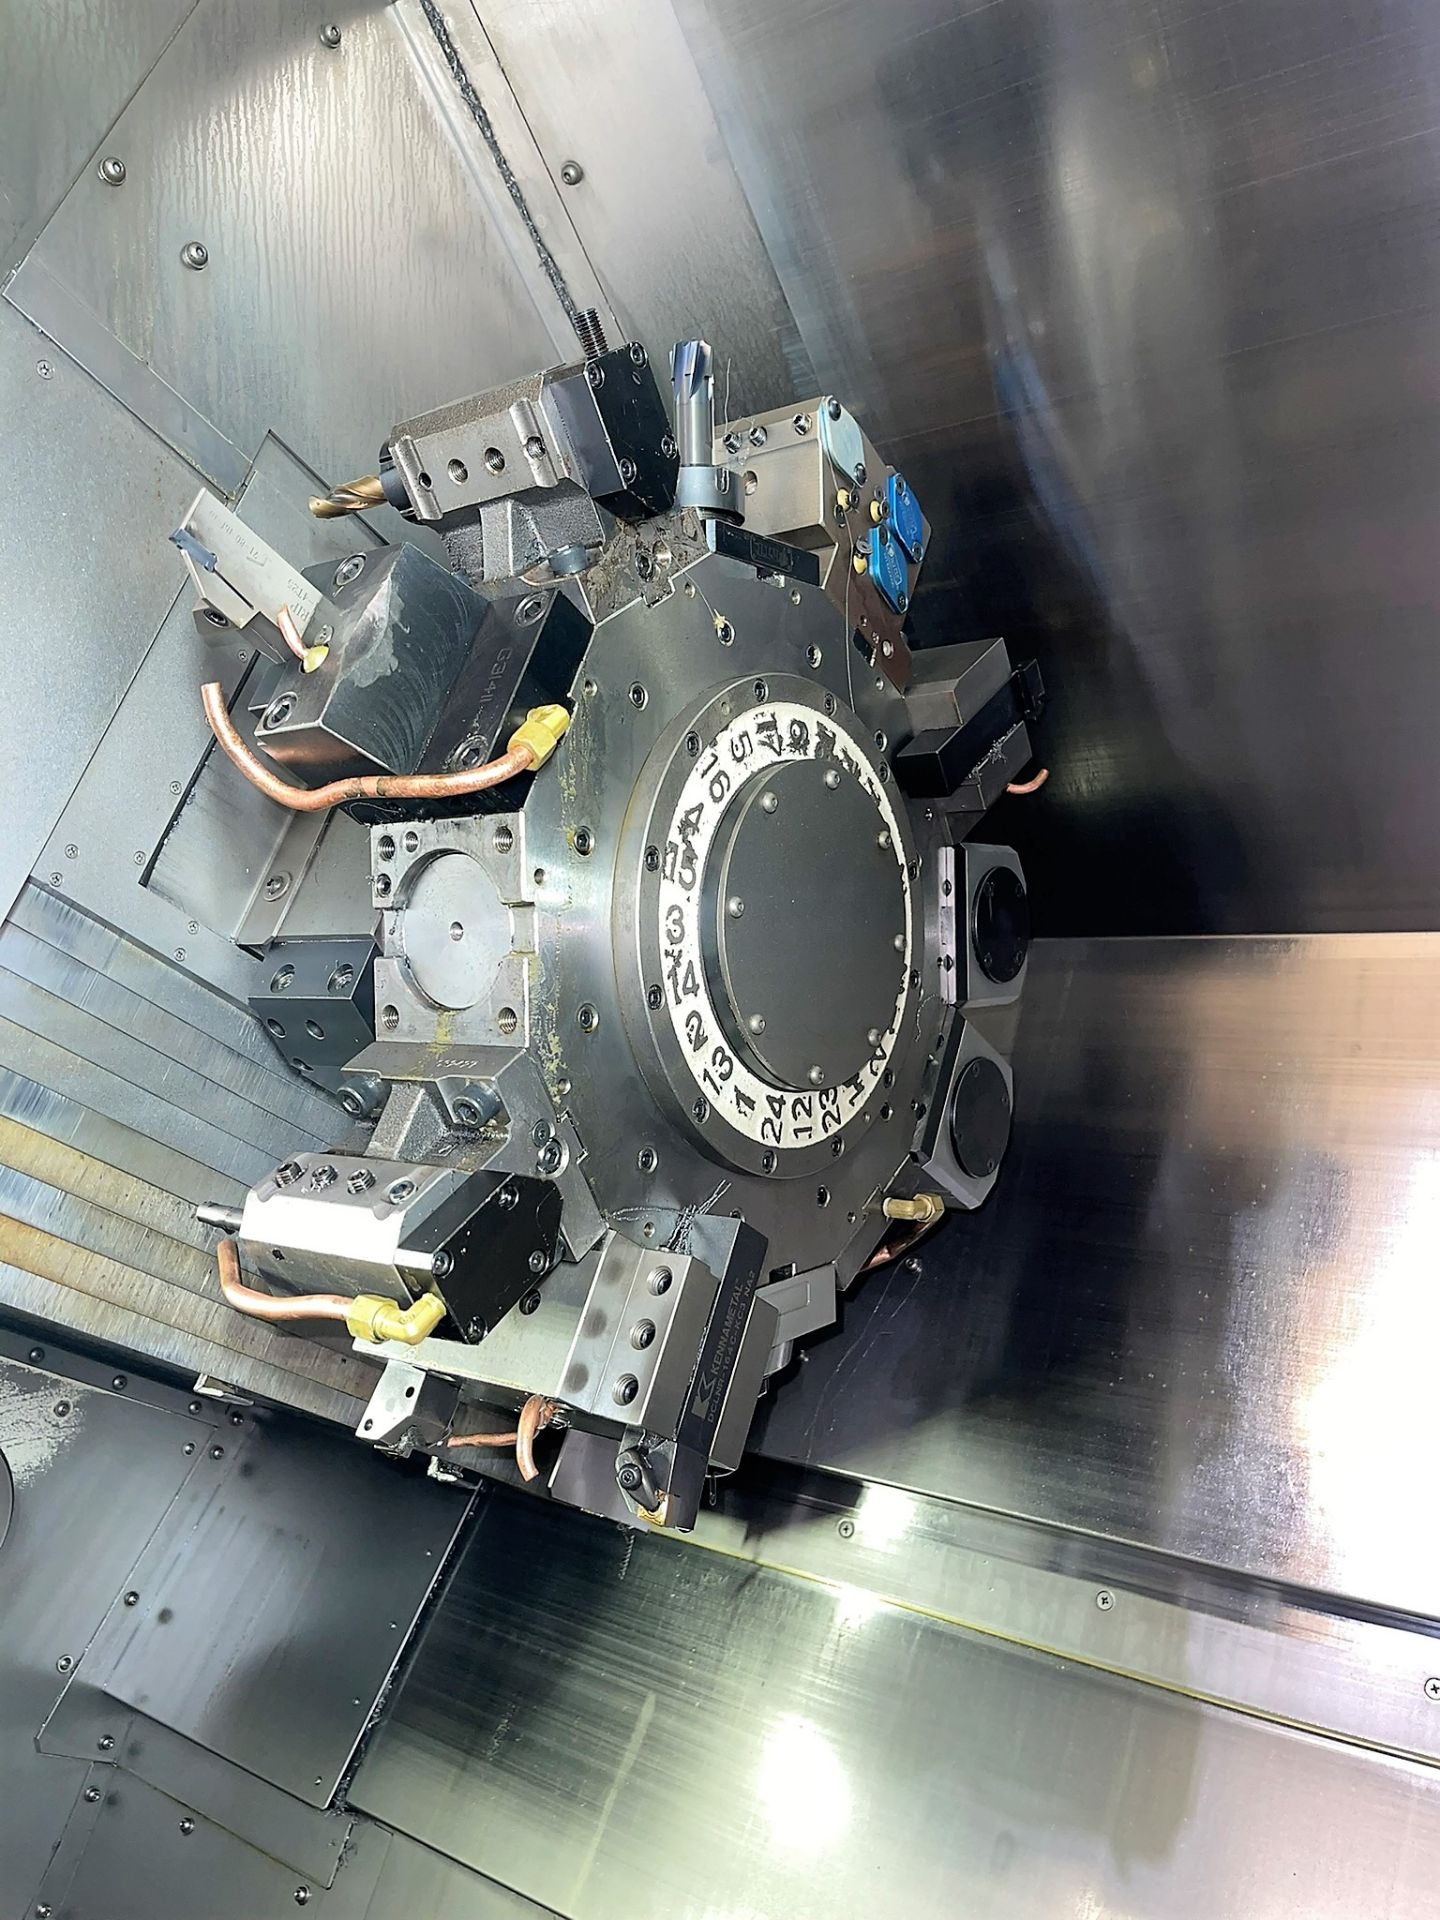 2012 Nakamura Super-Mill WY-250L 10-Axis CNC Turning/Milling Center, S/N N280204 - Image 6 of 22